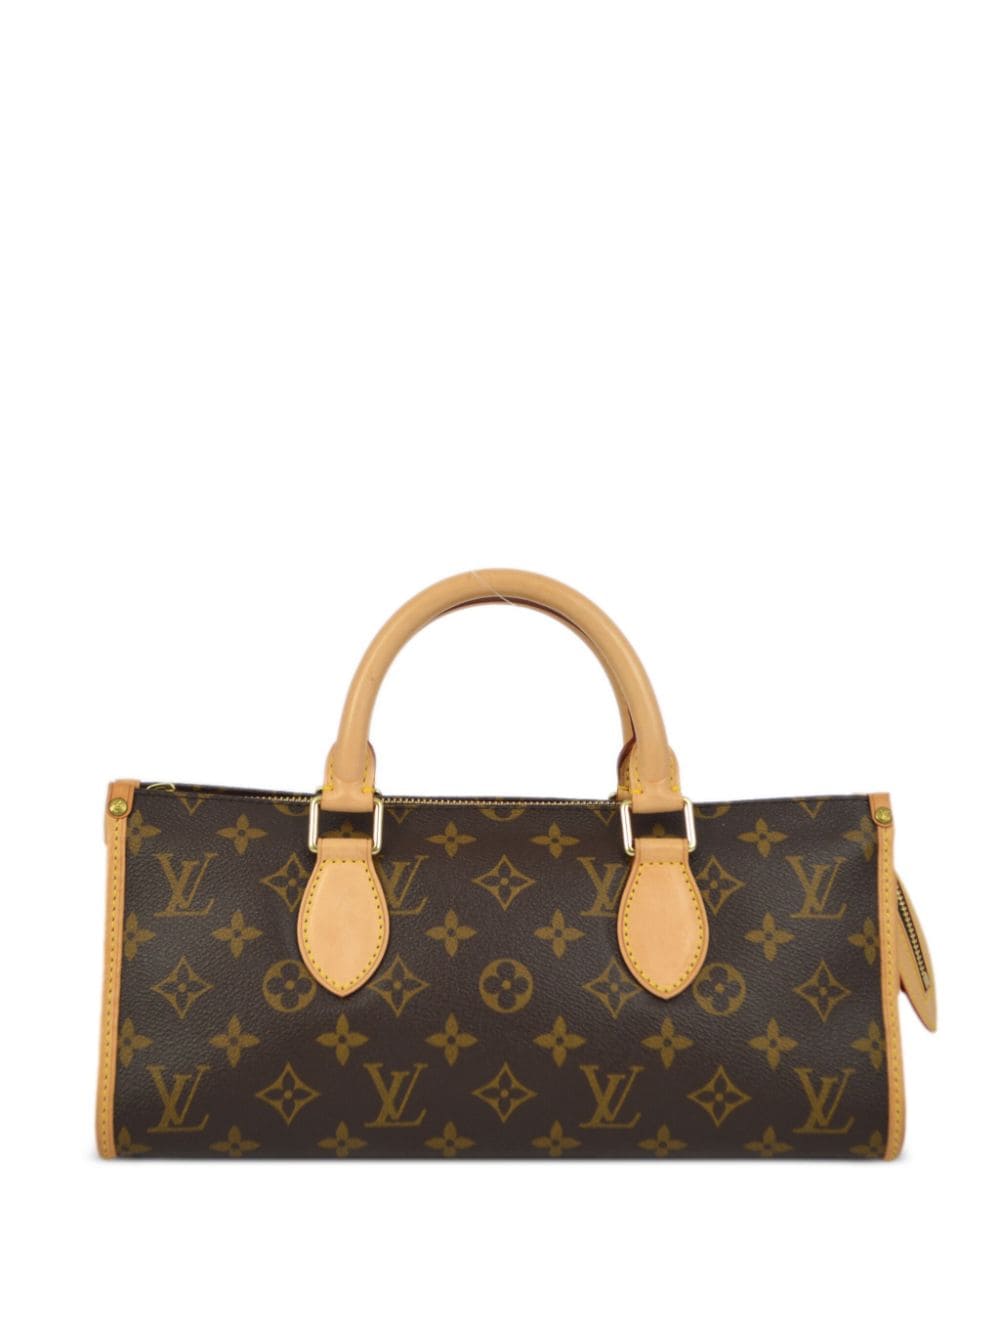 Louis Vuitton Pre-Owned Borsa a mano Popincourt Pre-owned 2006 - Marrone